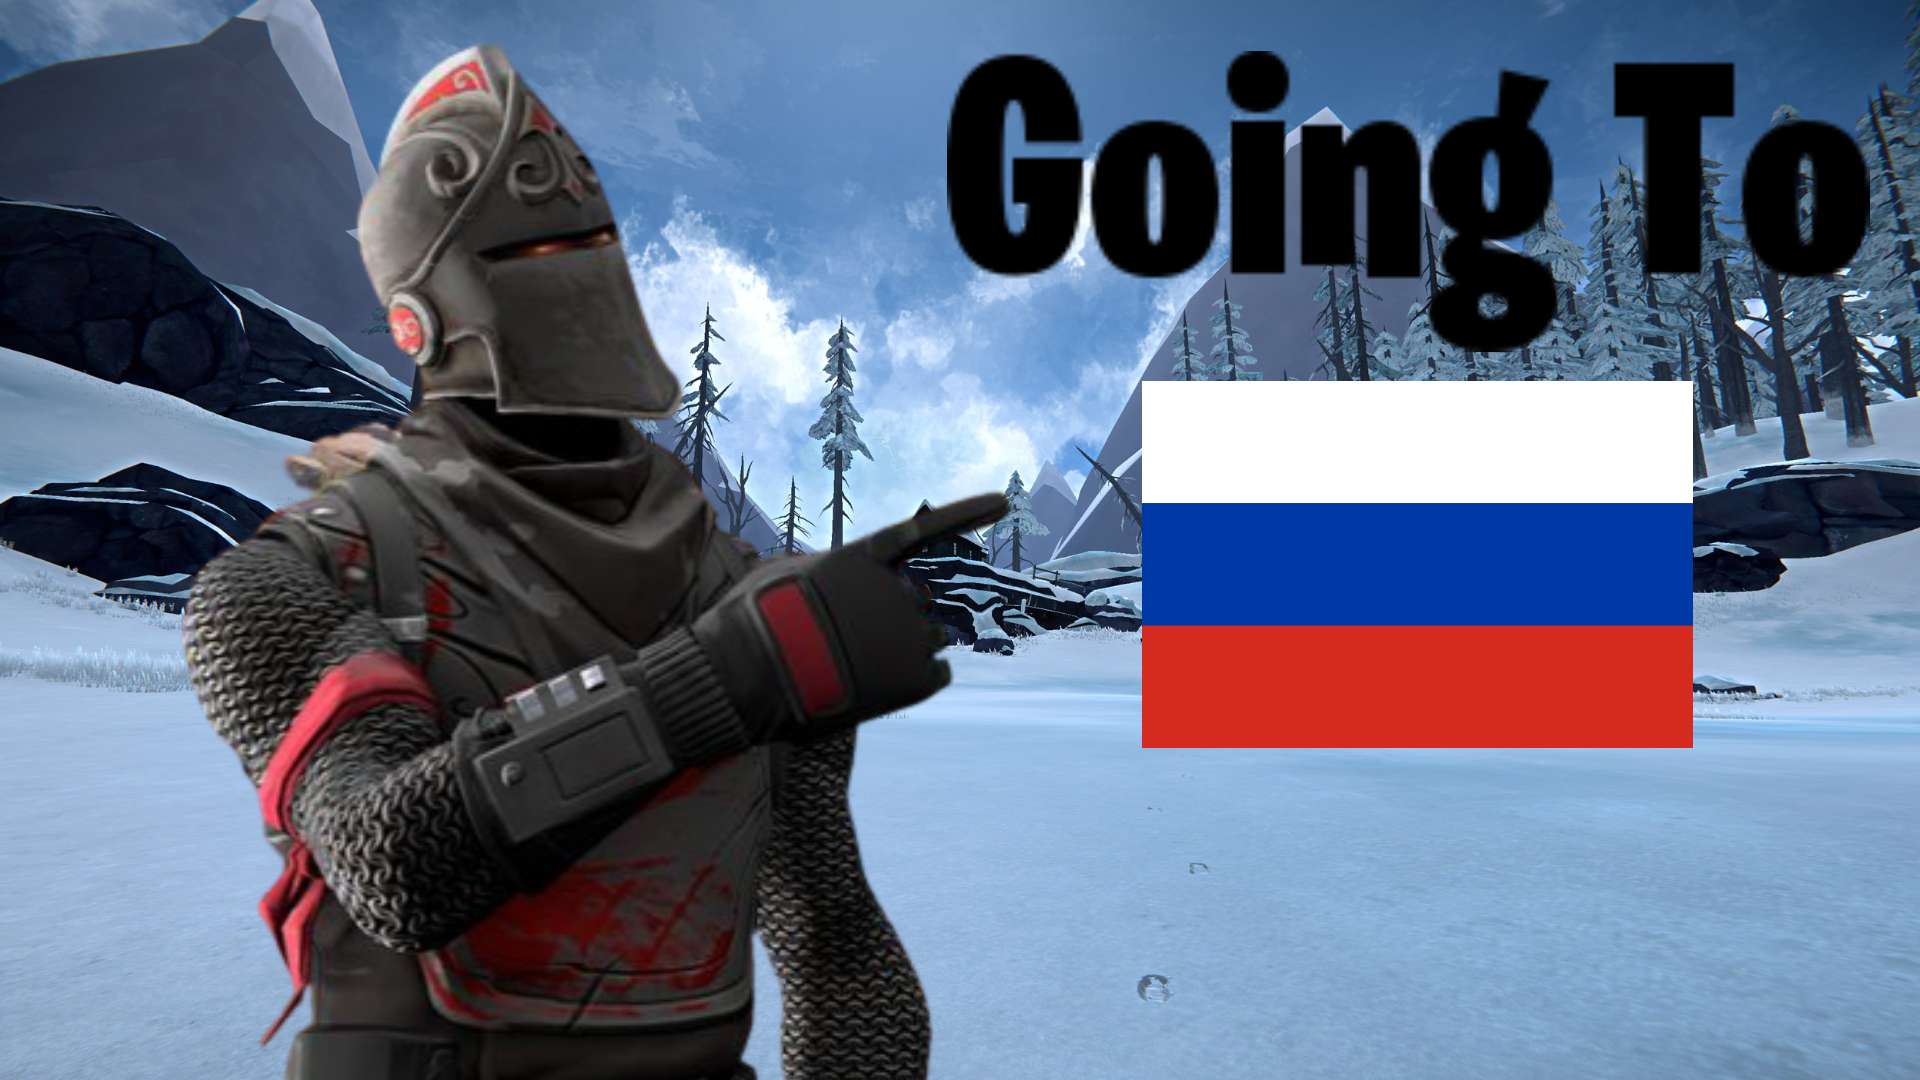 DEATHRUN: GOING TO RUSSIA